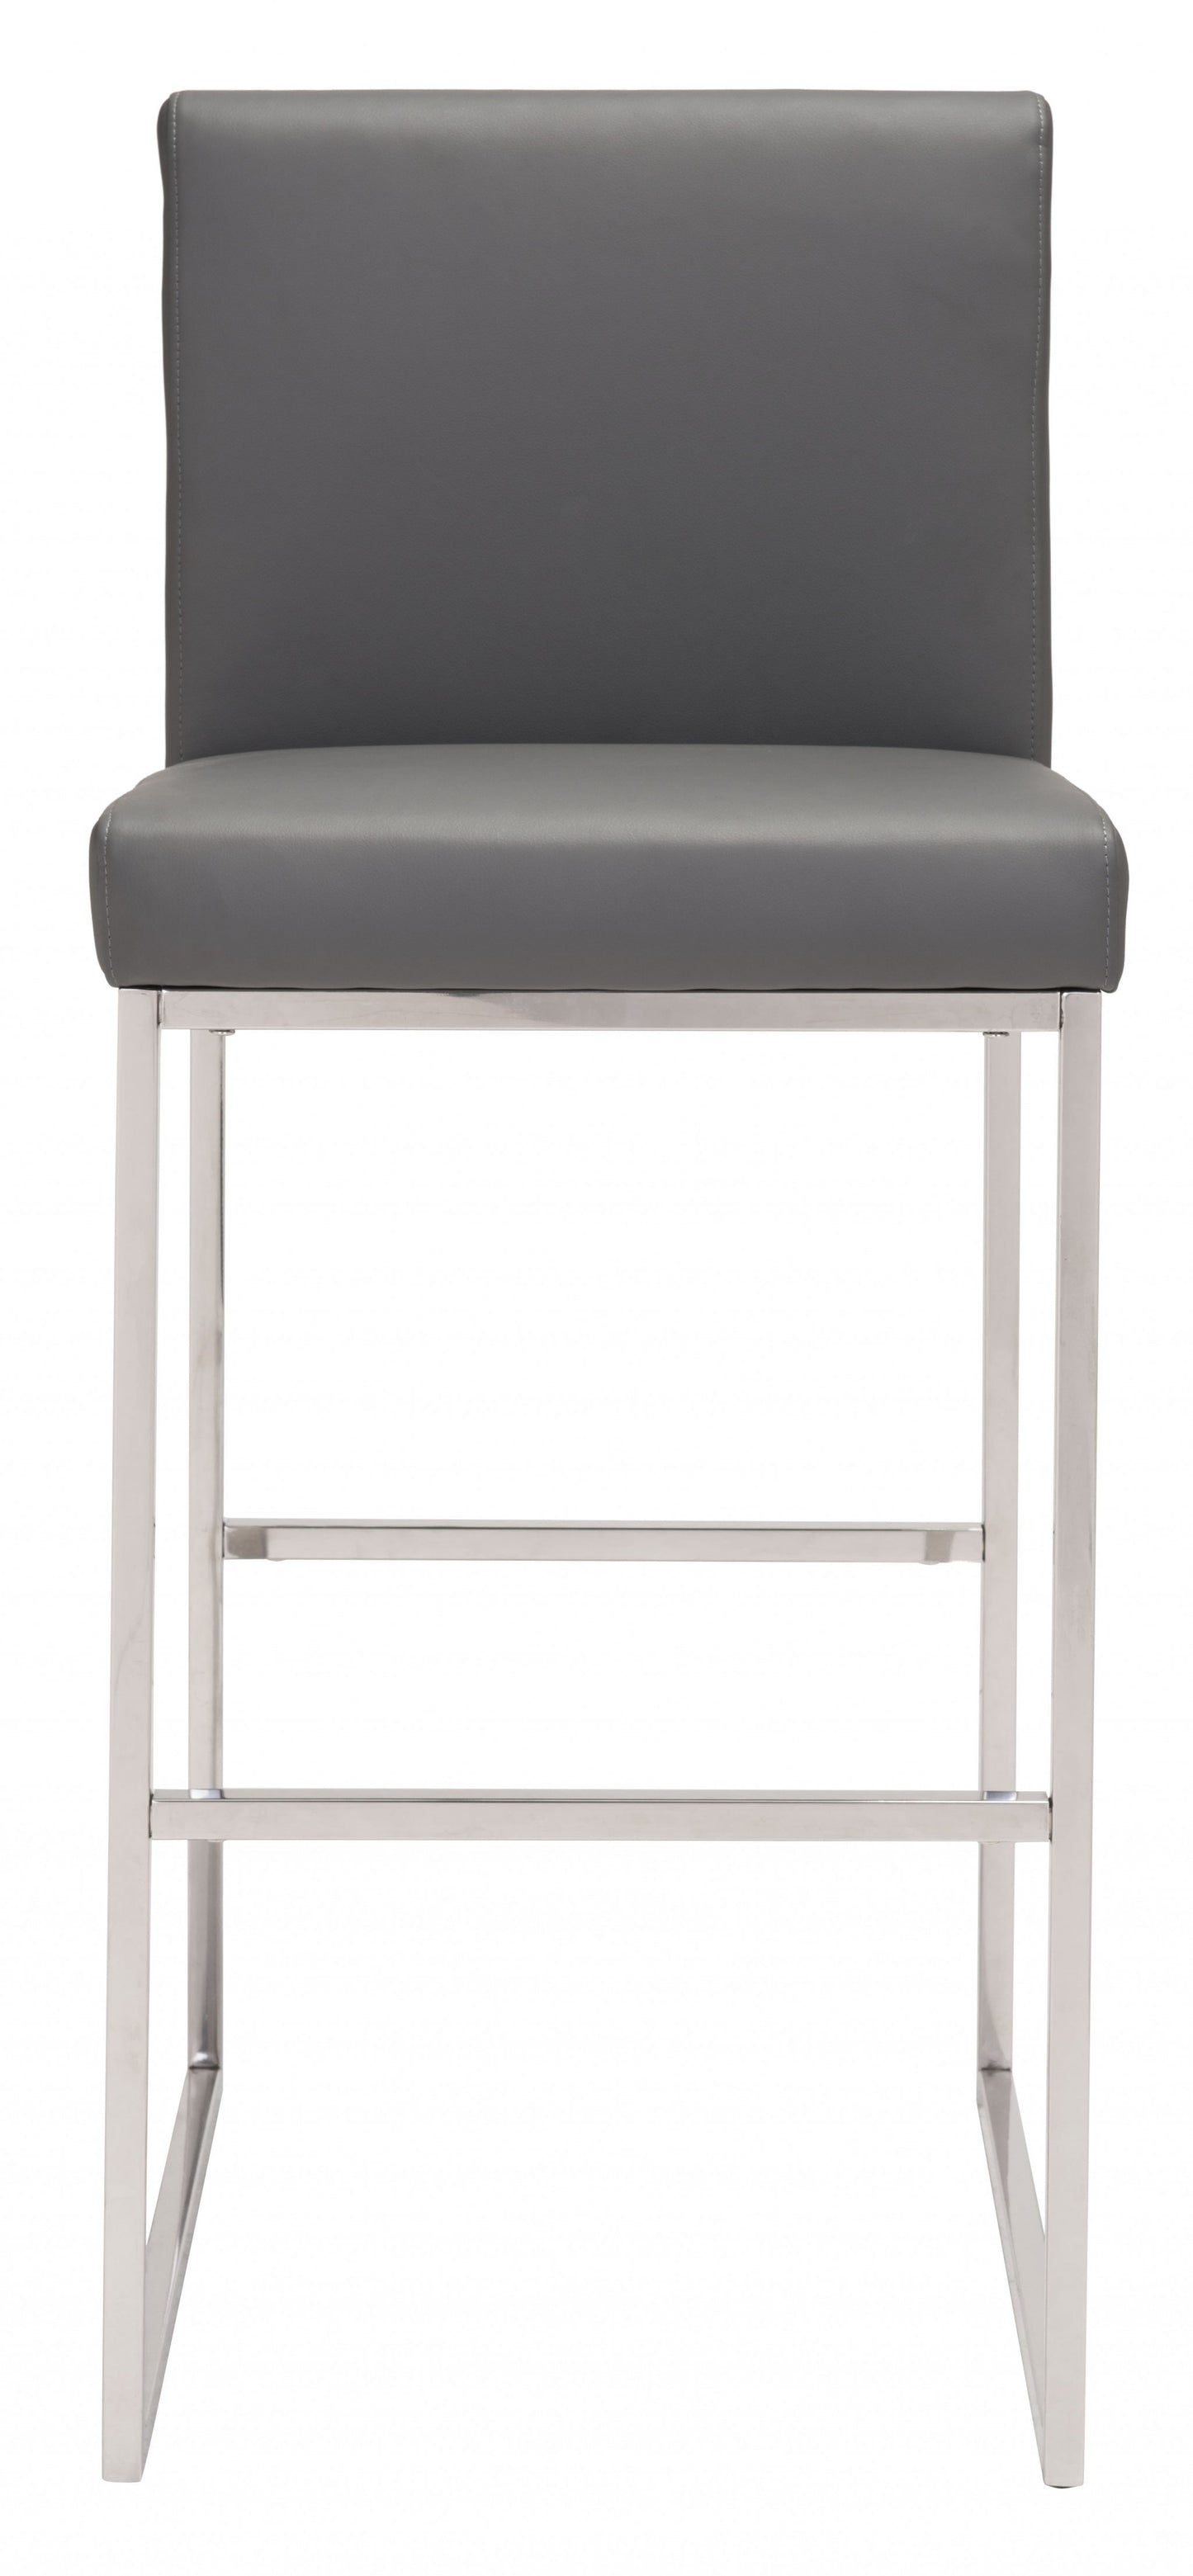 43" Gray Faux Leather And Chrome Low Back Bar Height Chair With Footrest By Homeroots